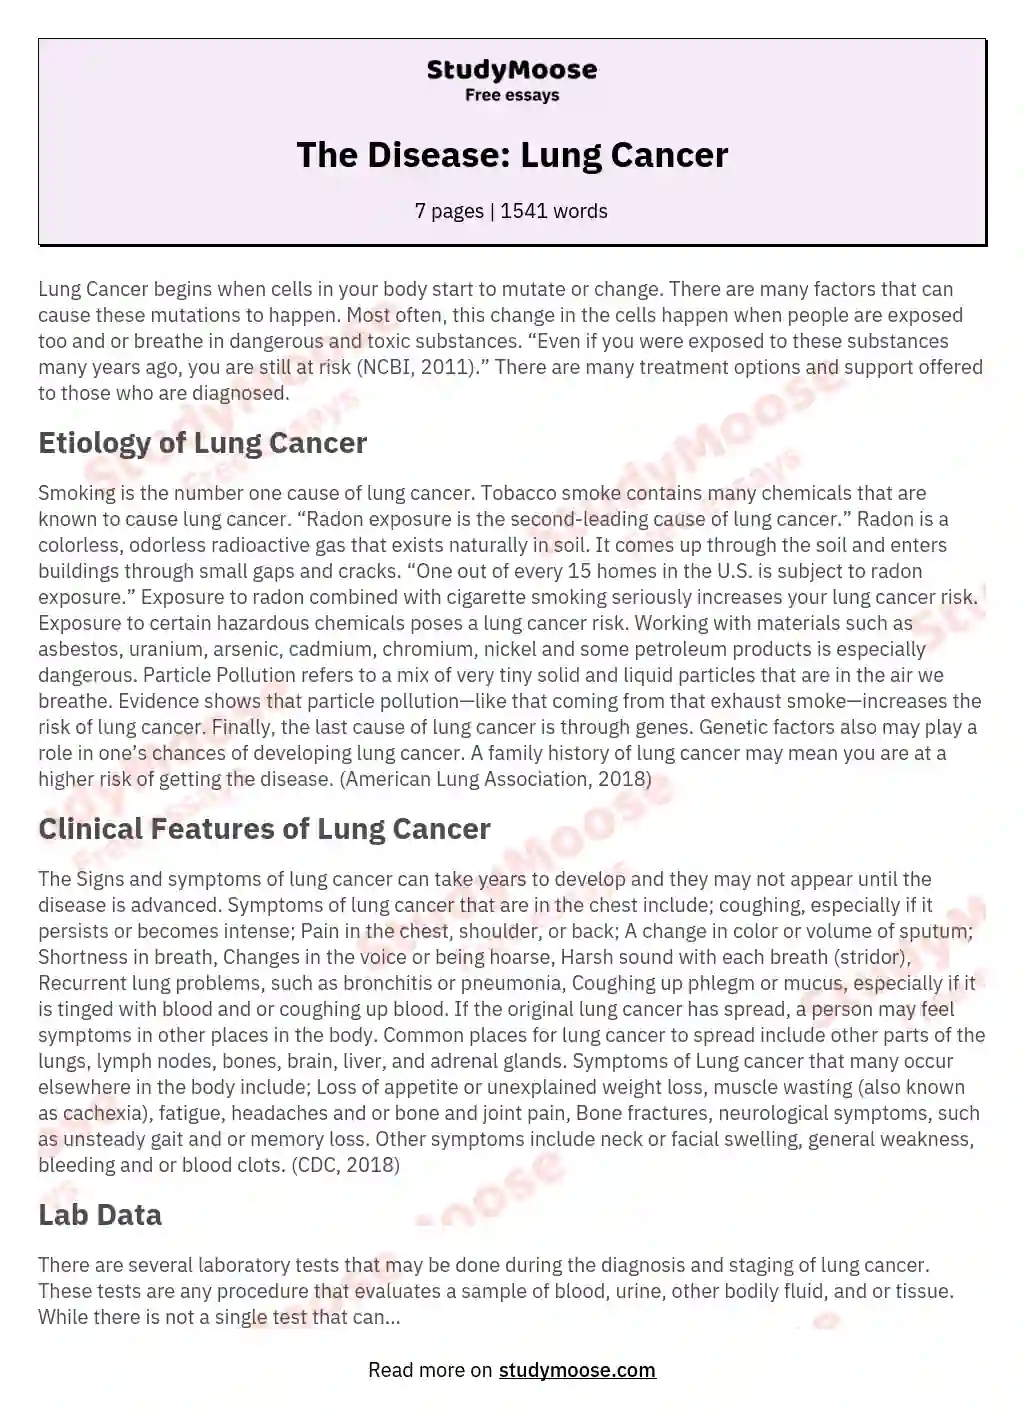 The Disease: Lung Cancer essay